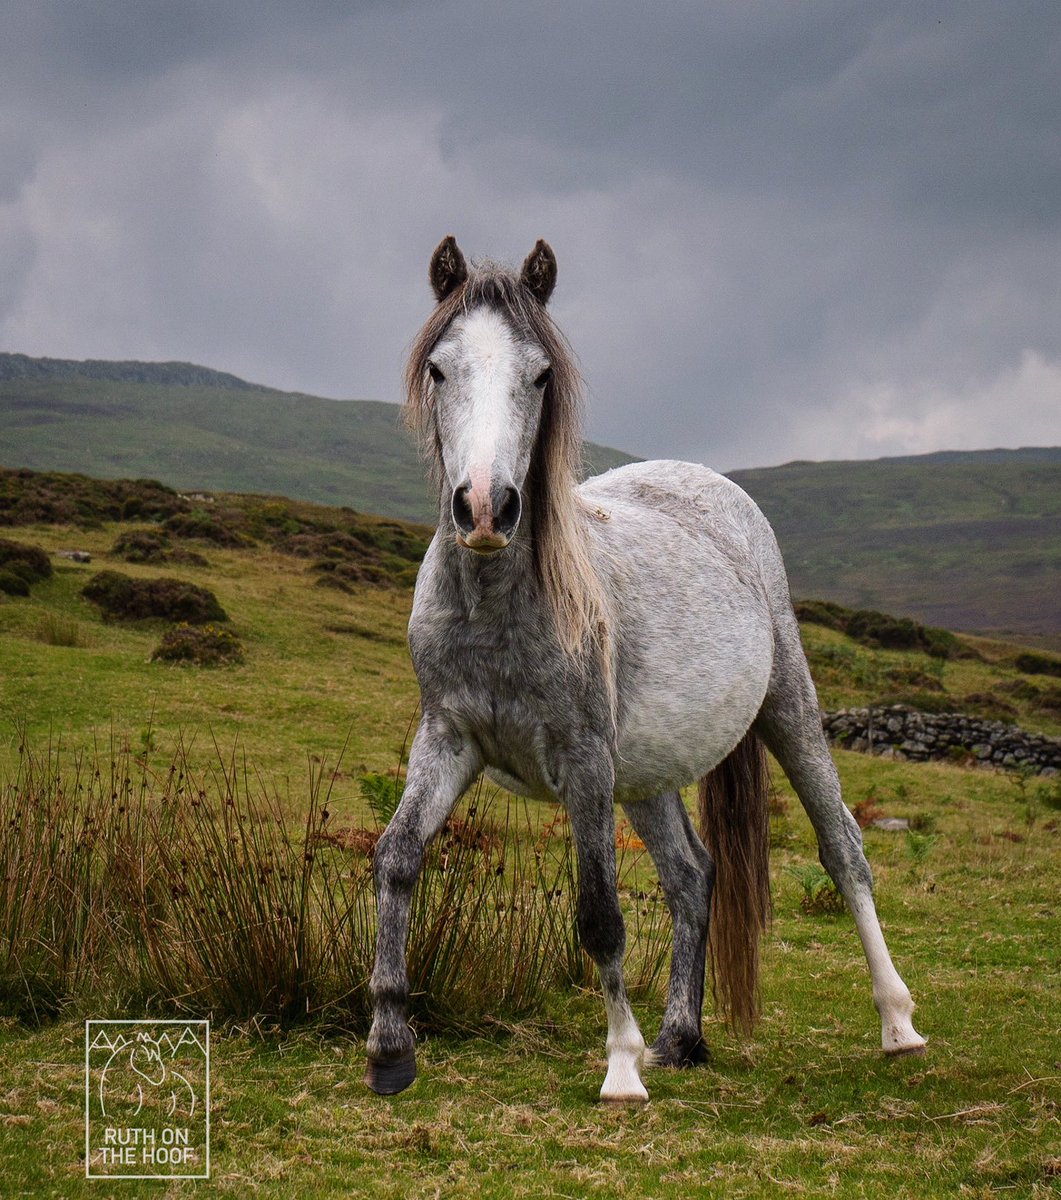 Lovely #Carneddaupony - the closest ponies in the UK to being wild. They are truly formed by their environment, & the local ecology benefits from their presence. Numbers are controlled through annual gathers which take selected colts & adults off the mountain & into domestic life